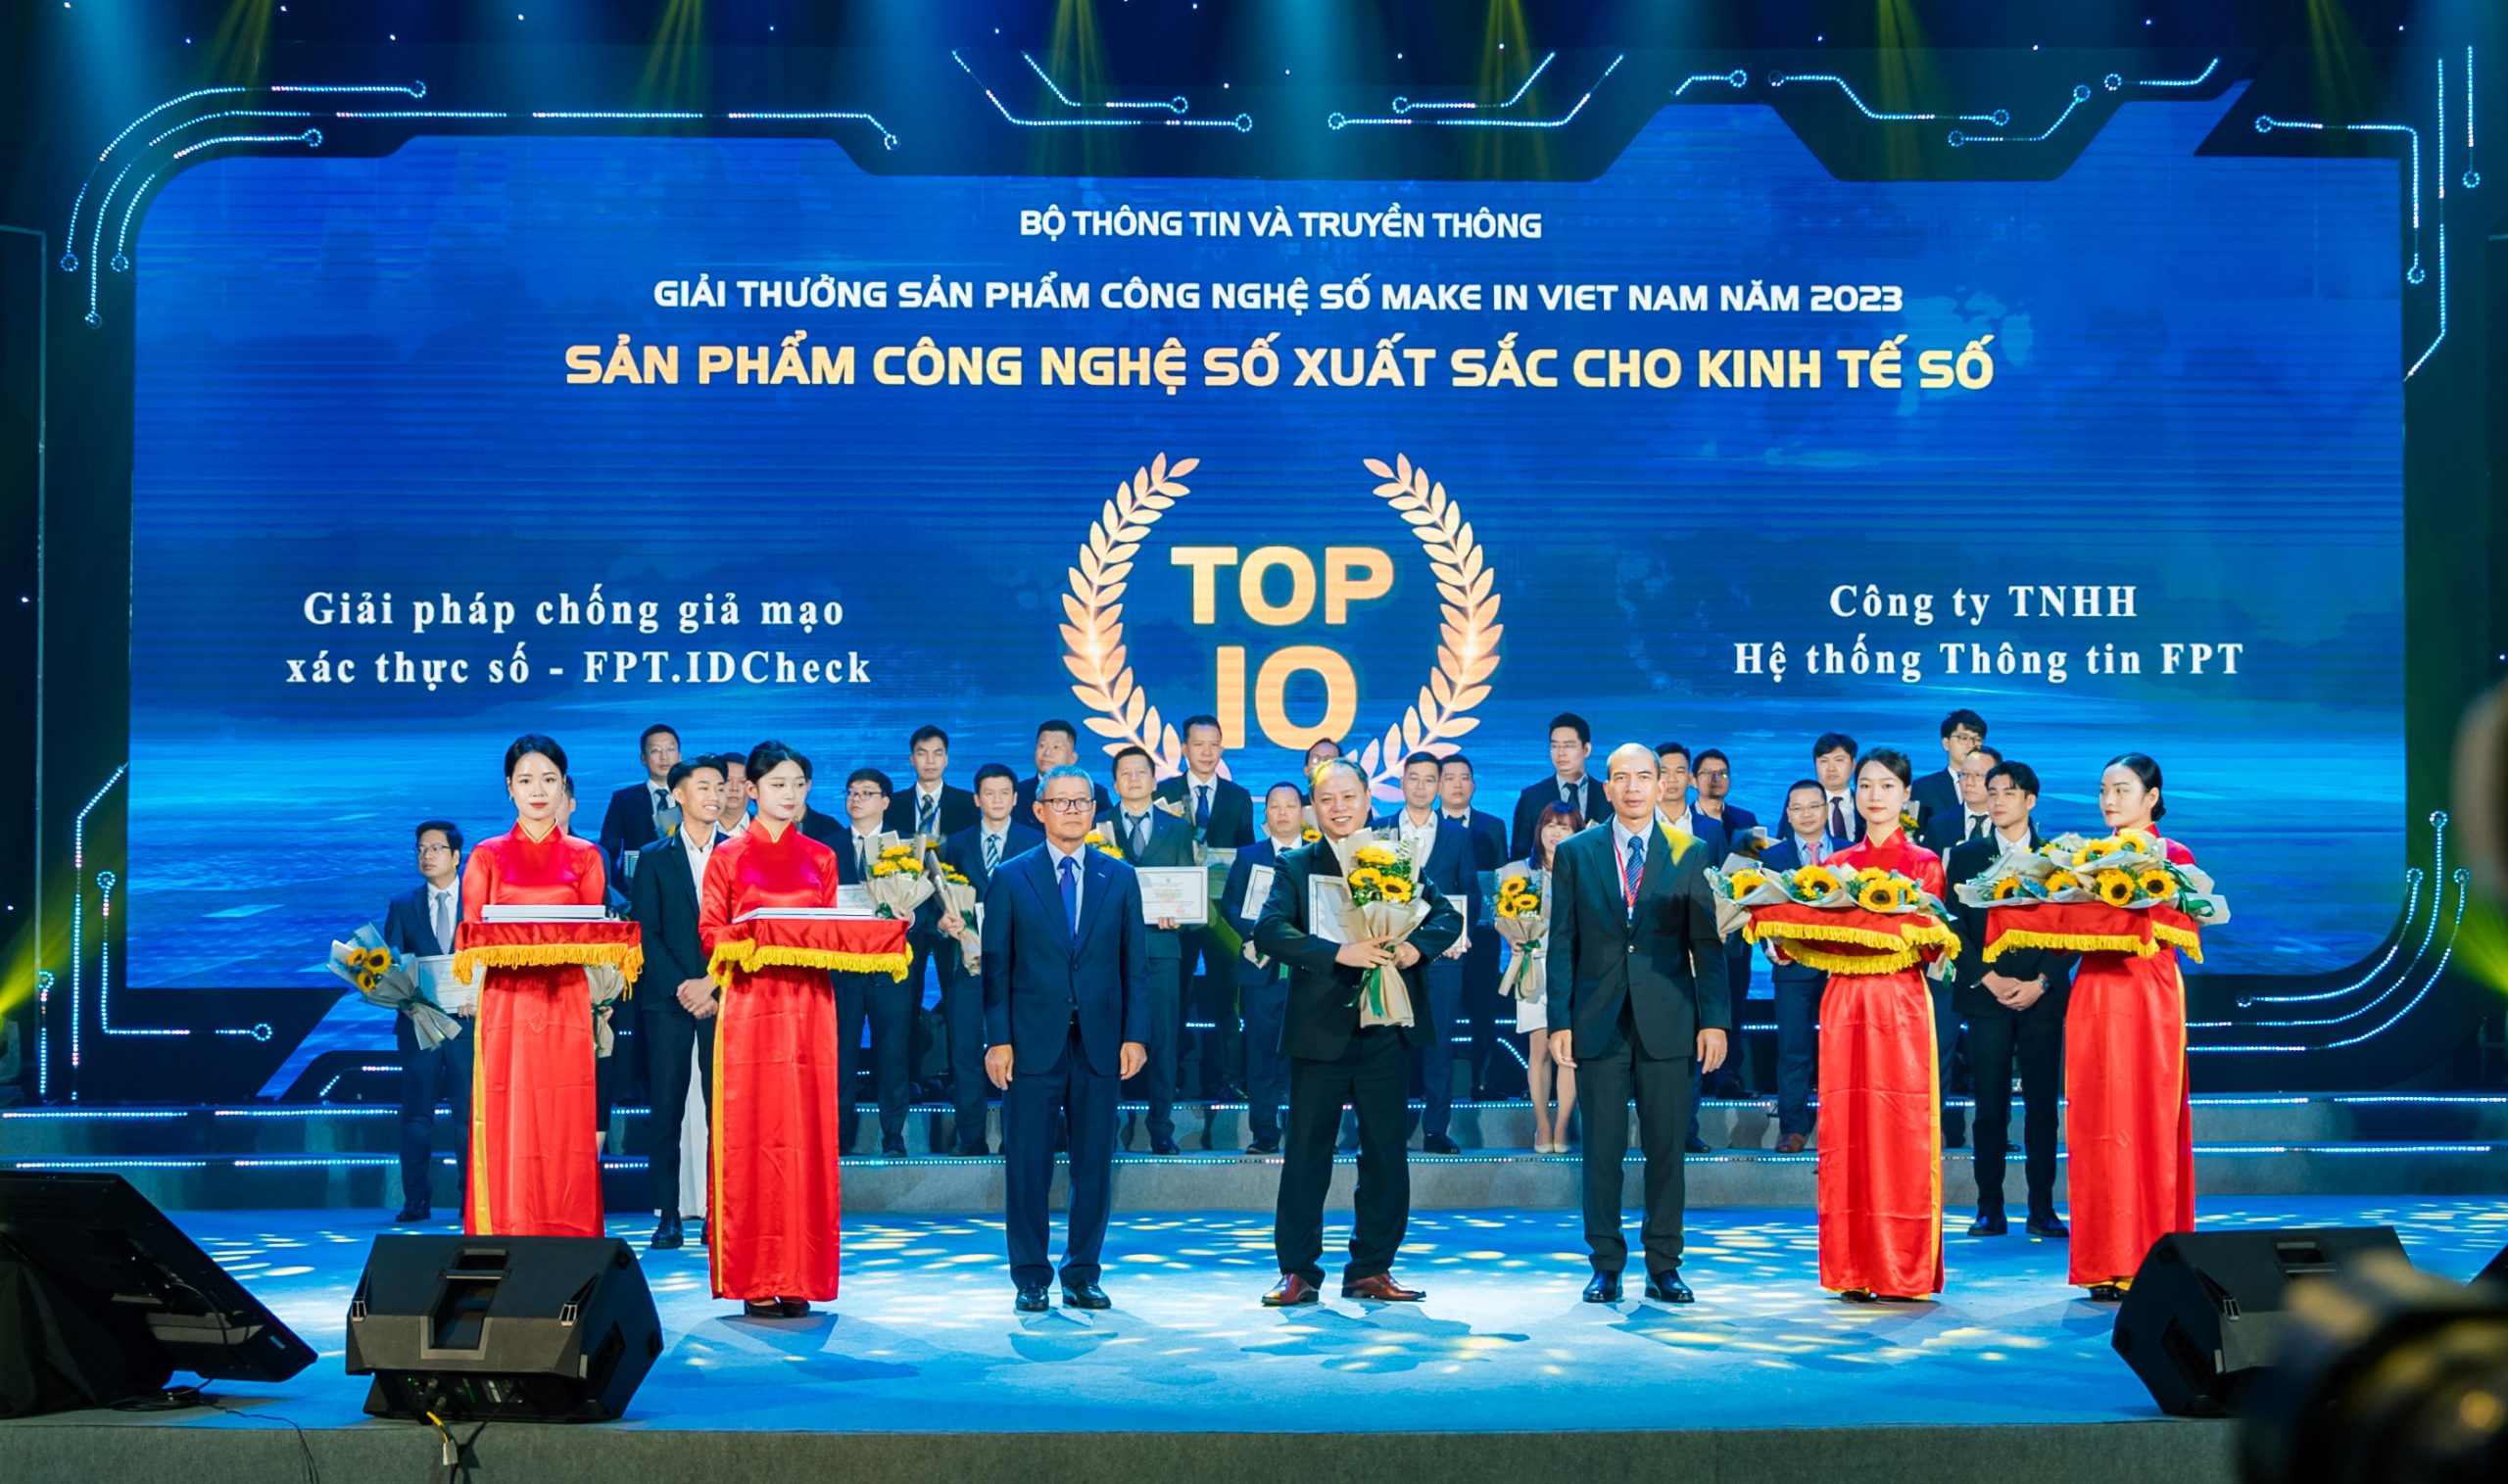 2023 Make in Viet Nam Digital Technology Product Awards – Top 10 Excellent Digital Technology Products for the Digital Economy category – Anti-fraud Solution for Digital Identity Verification (FPT.IDCheck)